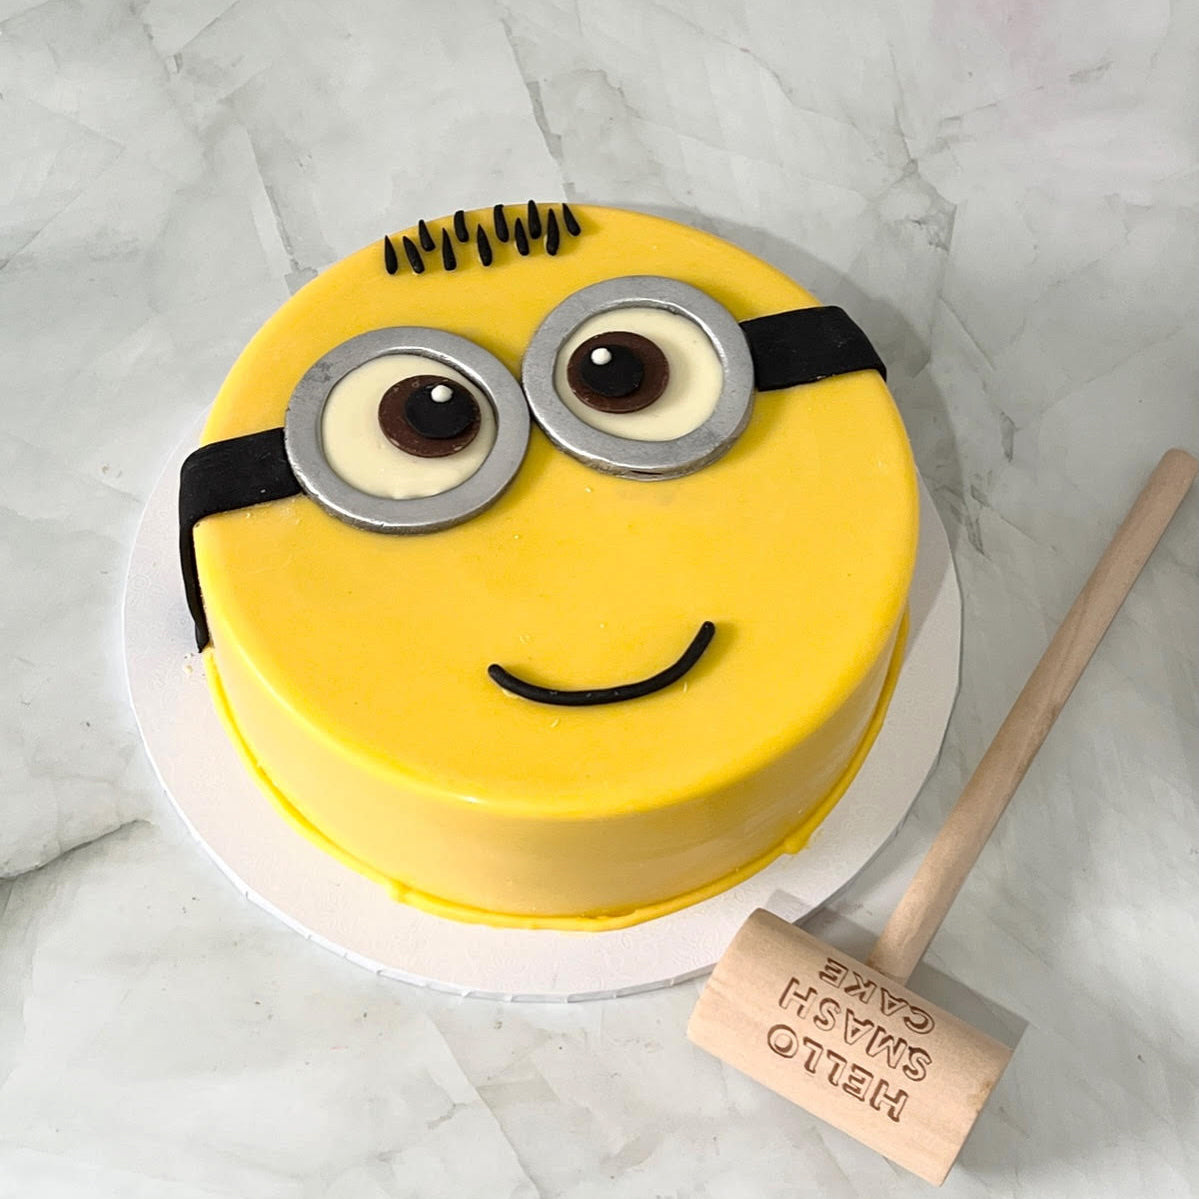 Despicable Me 3 Minion Cupcakes - Taste of the Frontier